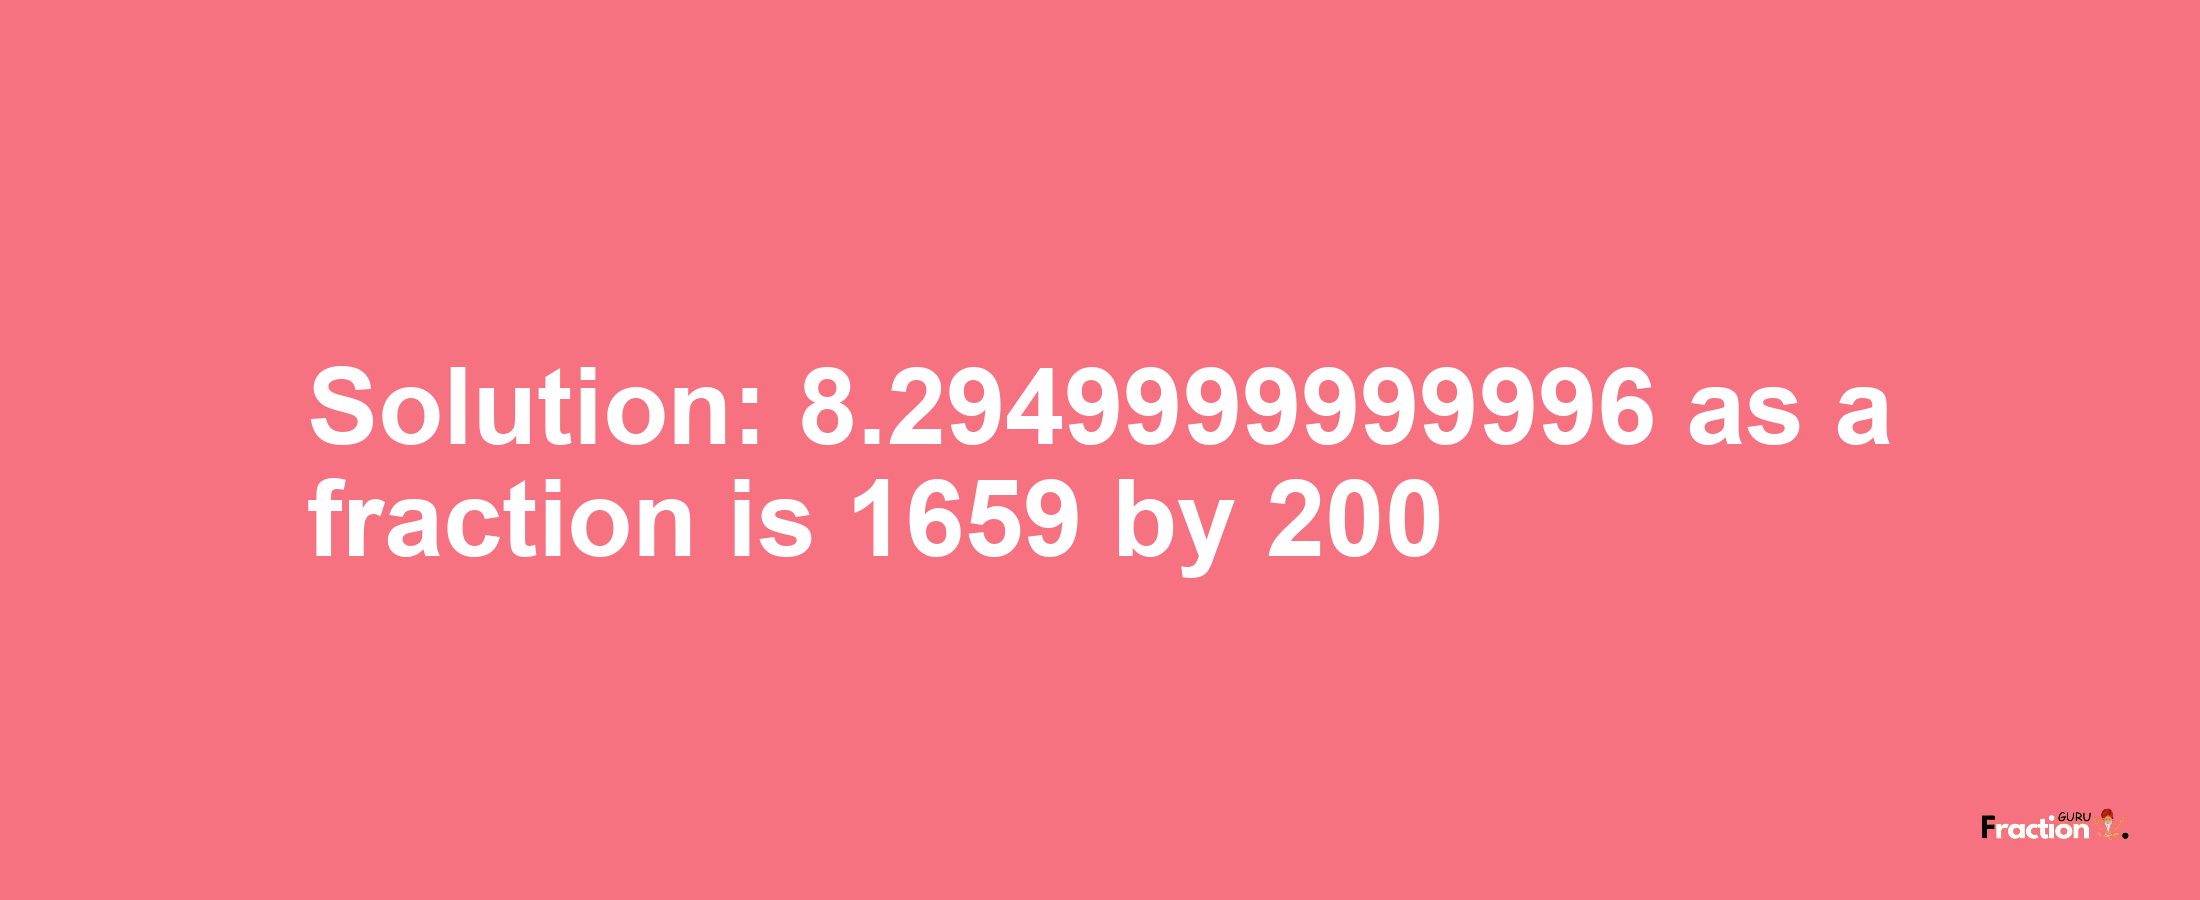 Solution:8.2949999999996 as a fraction is 1659/200